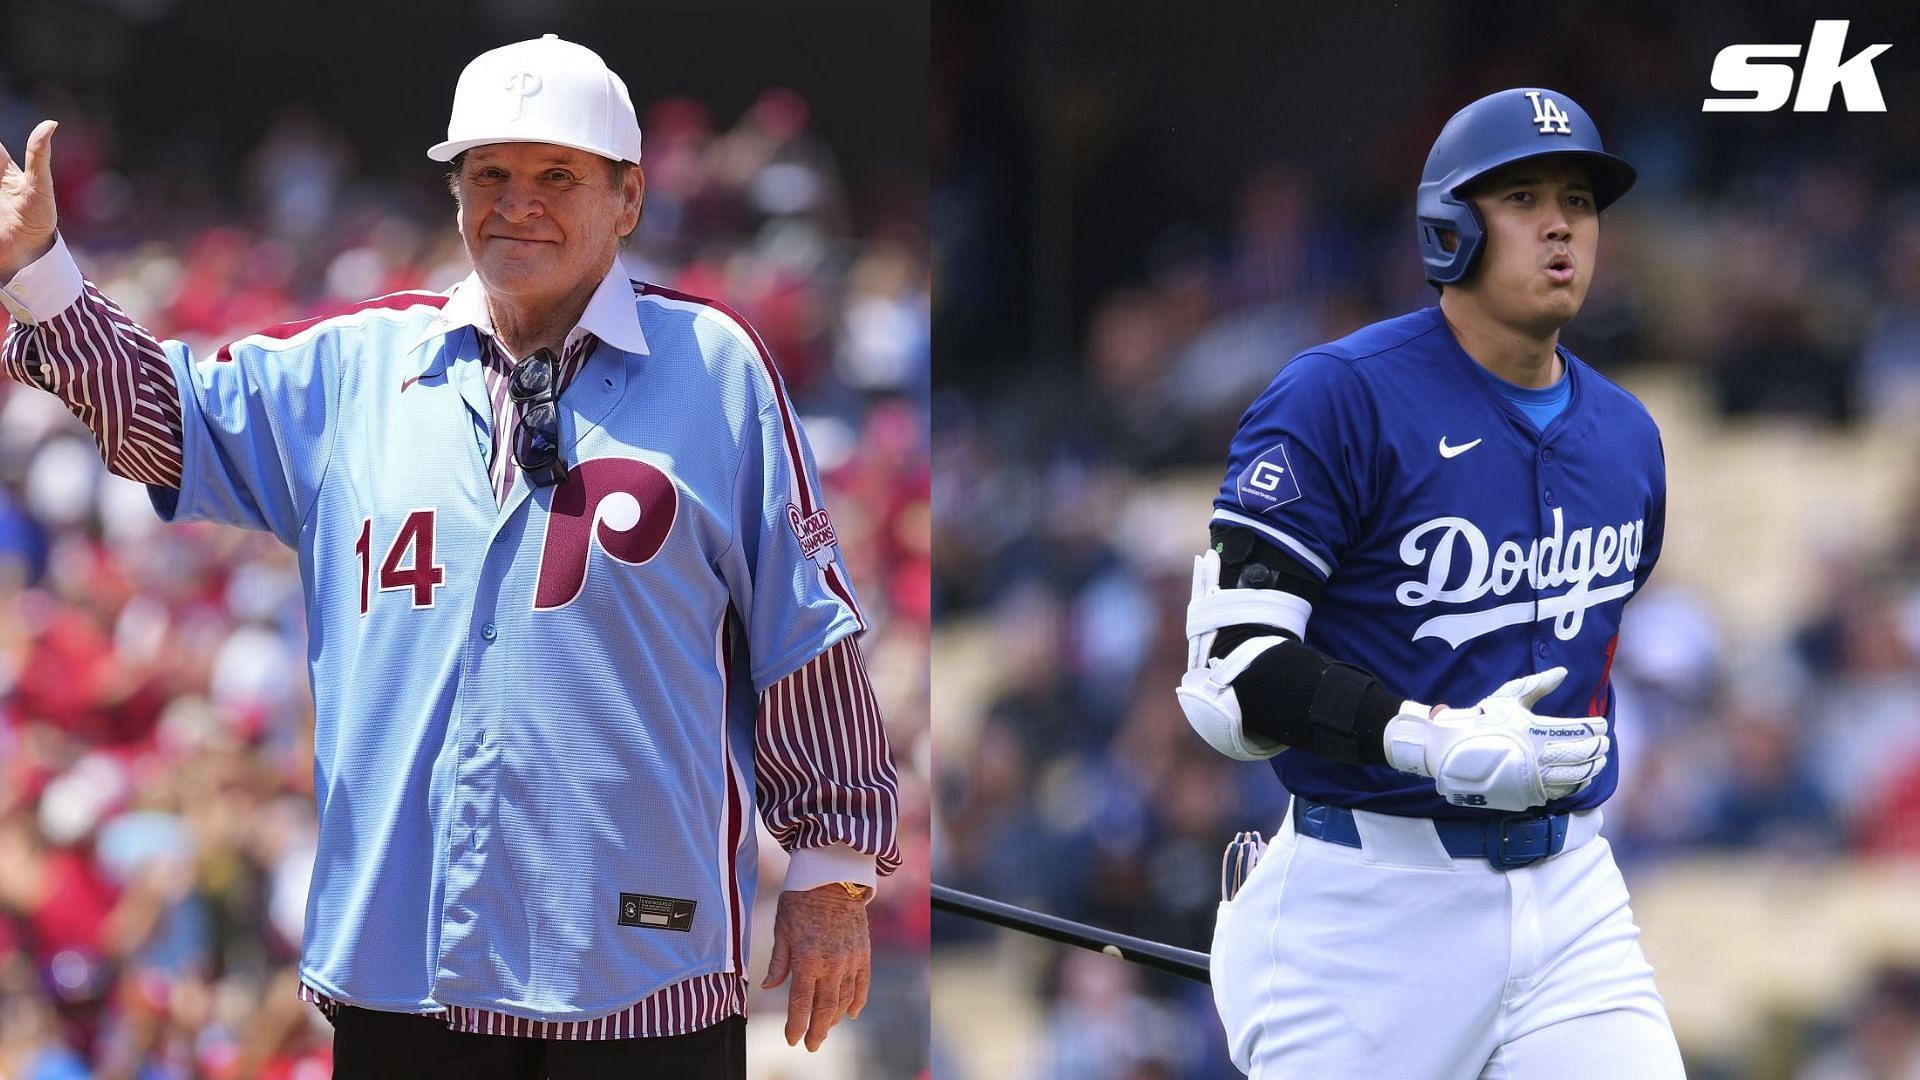 Reds icon Pete Rose takes shot at Shohei Ohtani over the illgeal gambling allegations surrounding his former interpreter Ippei Mizuhara